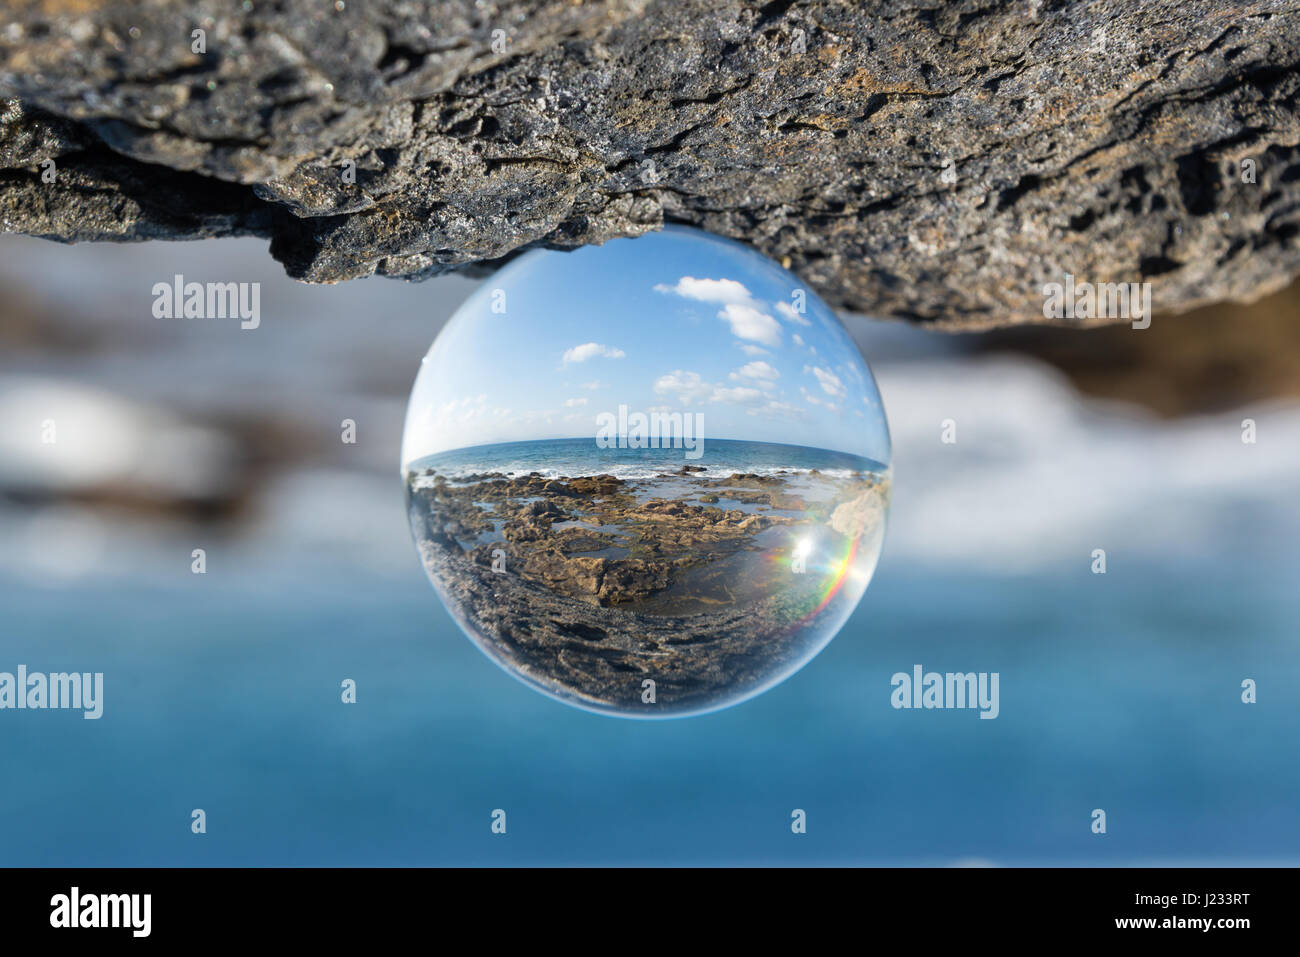 Landscape of sea and rocks seen through a glass ball Stock Photo